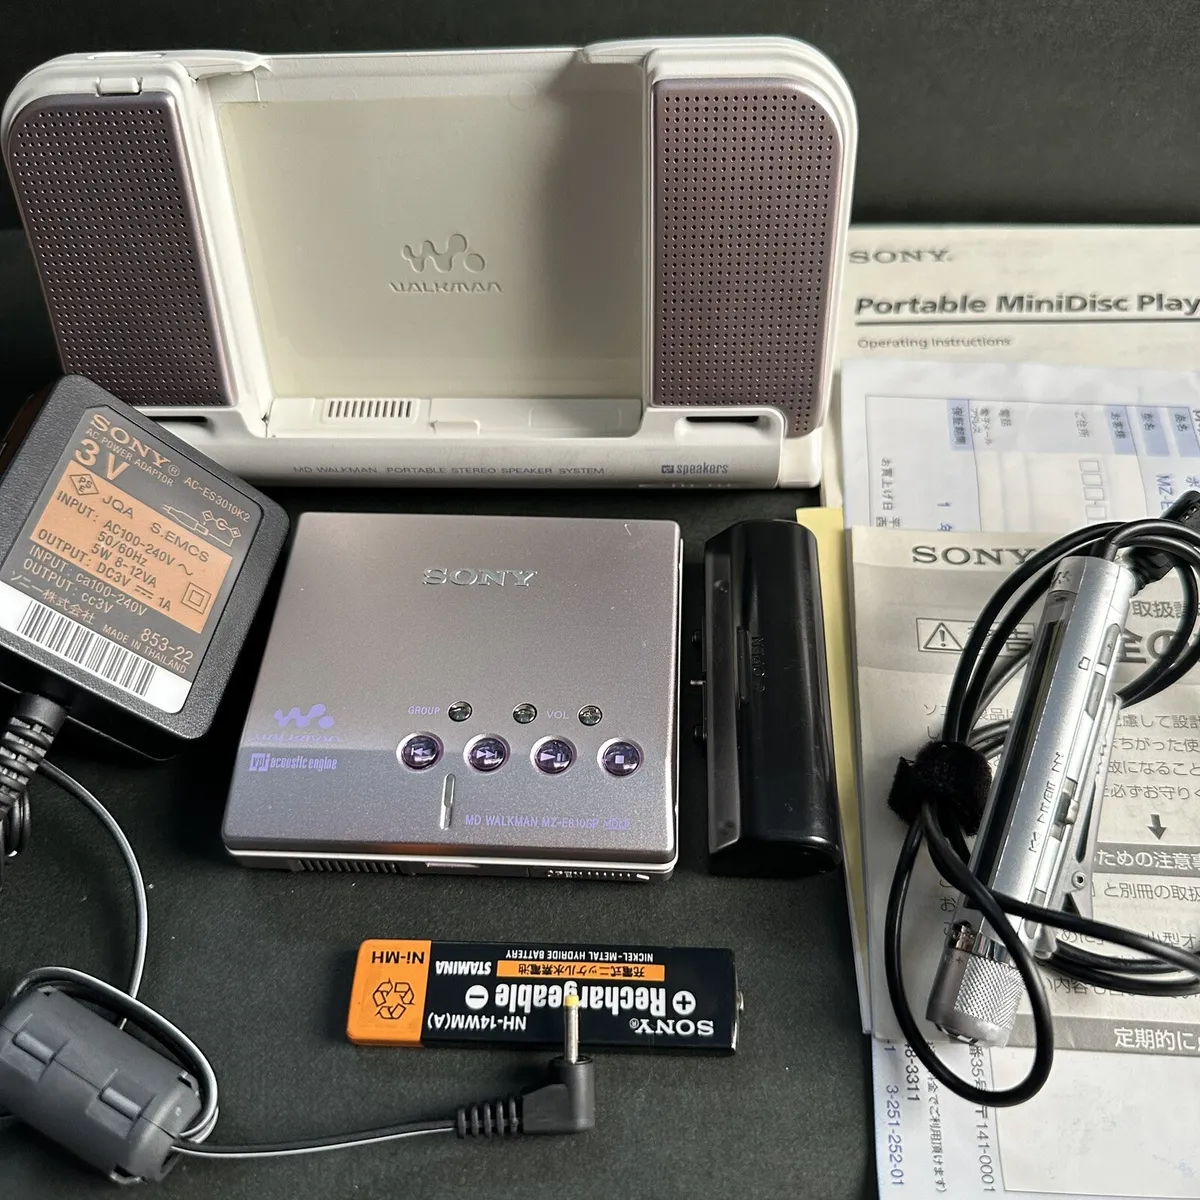 SONY MZ-E810SP Portable Minidisc Player Many accessories included